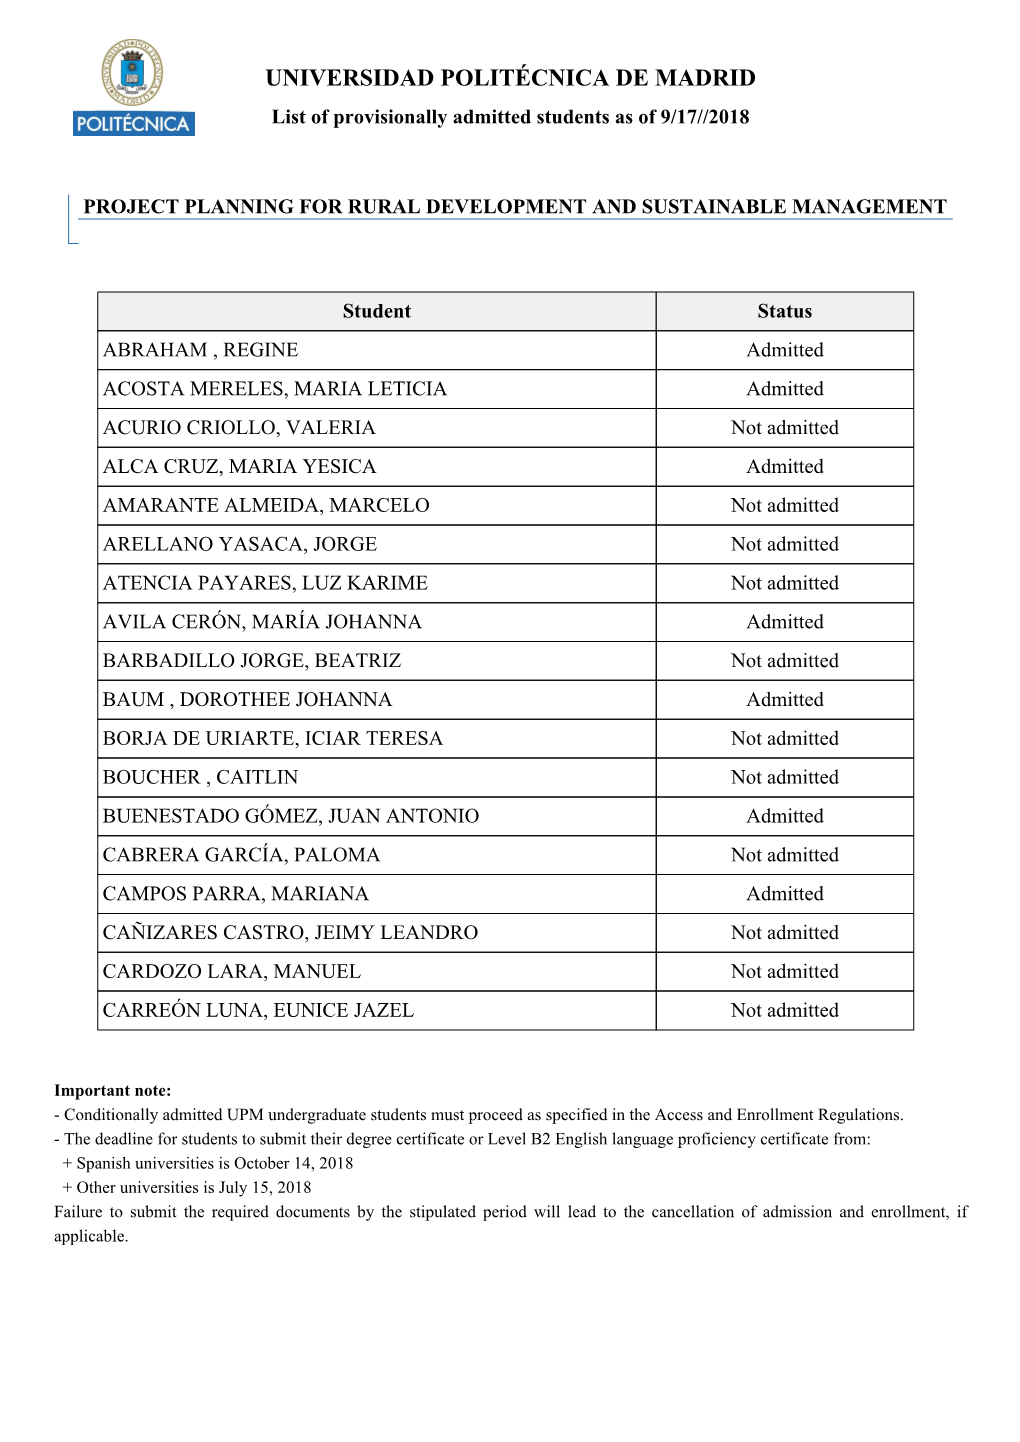 UNIVERSIDAD POLITÉCNICA DE MADRID List of Provisionally Admitted Students As of 9/17//2018